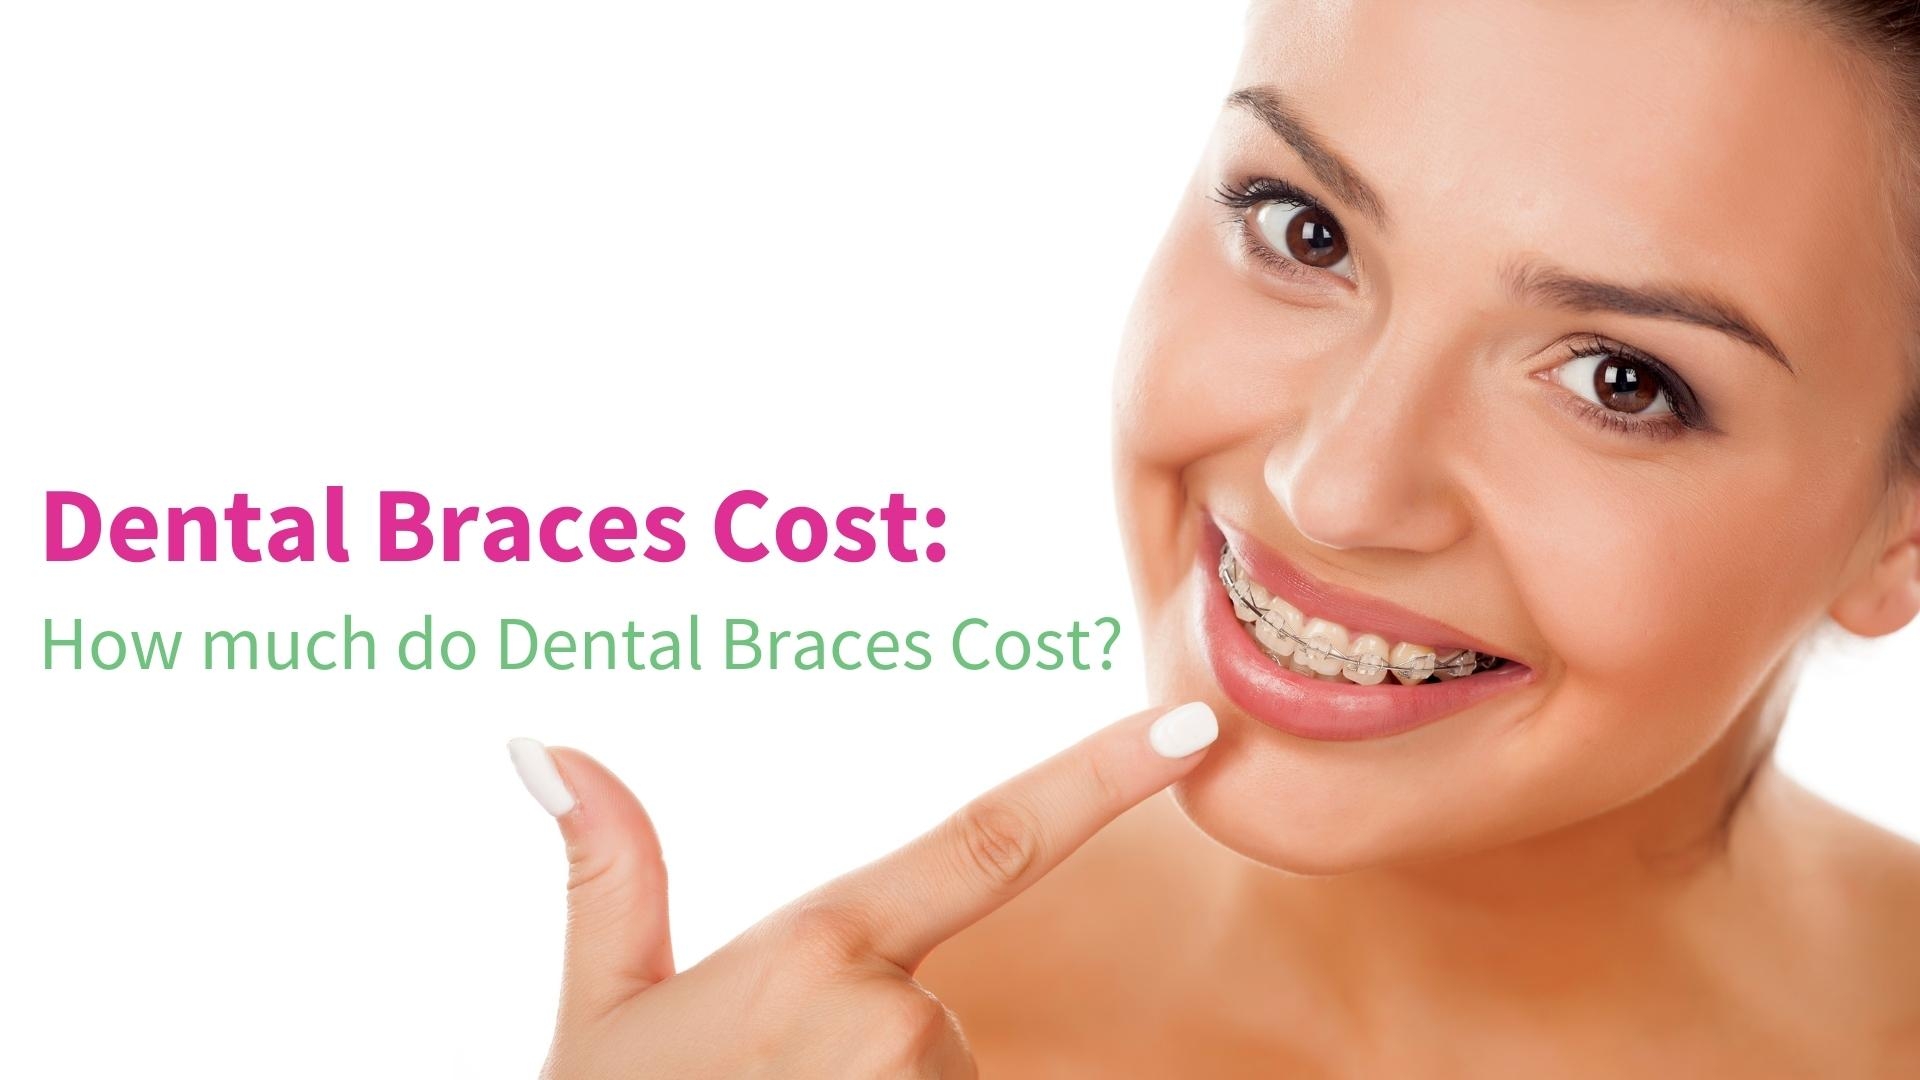 Dental Braces Cost in Noida: How much do Dental Braces Cost? - DR